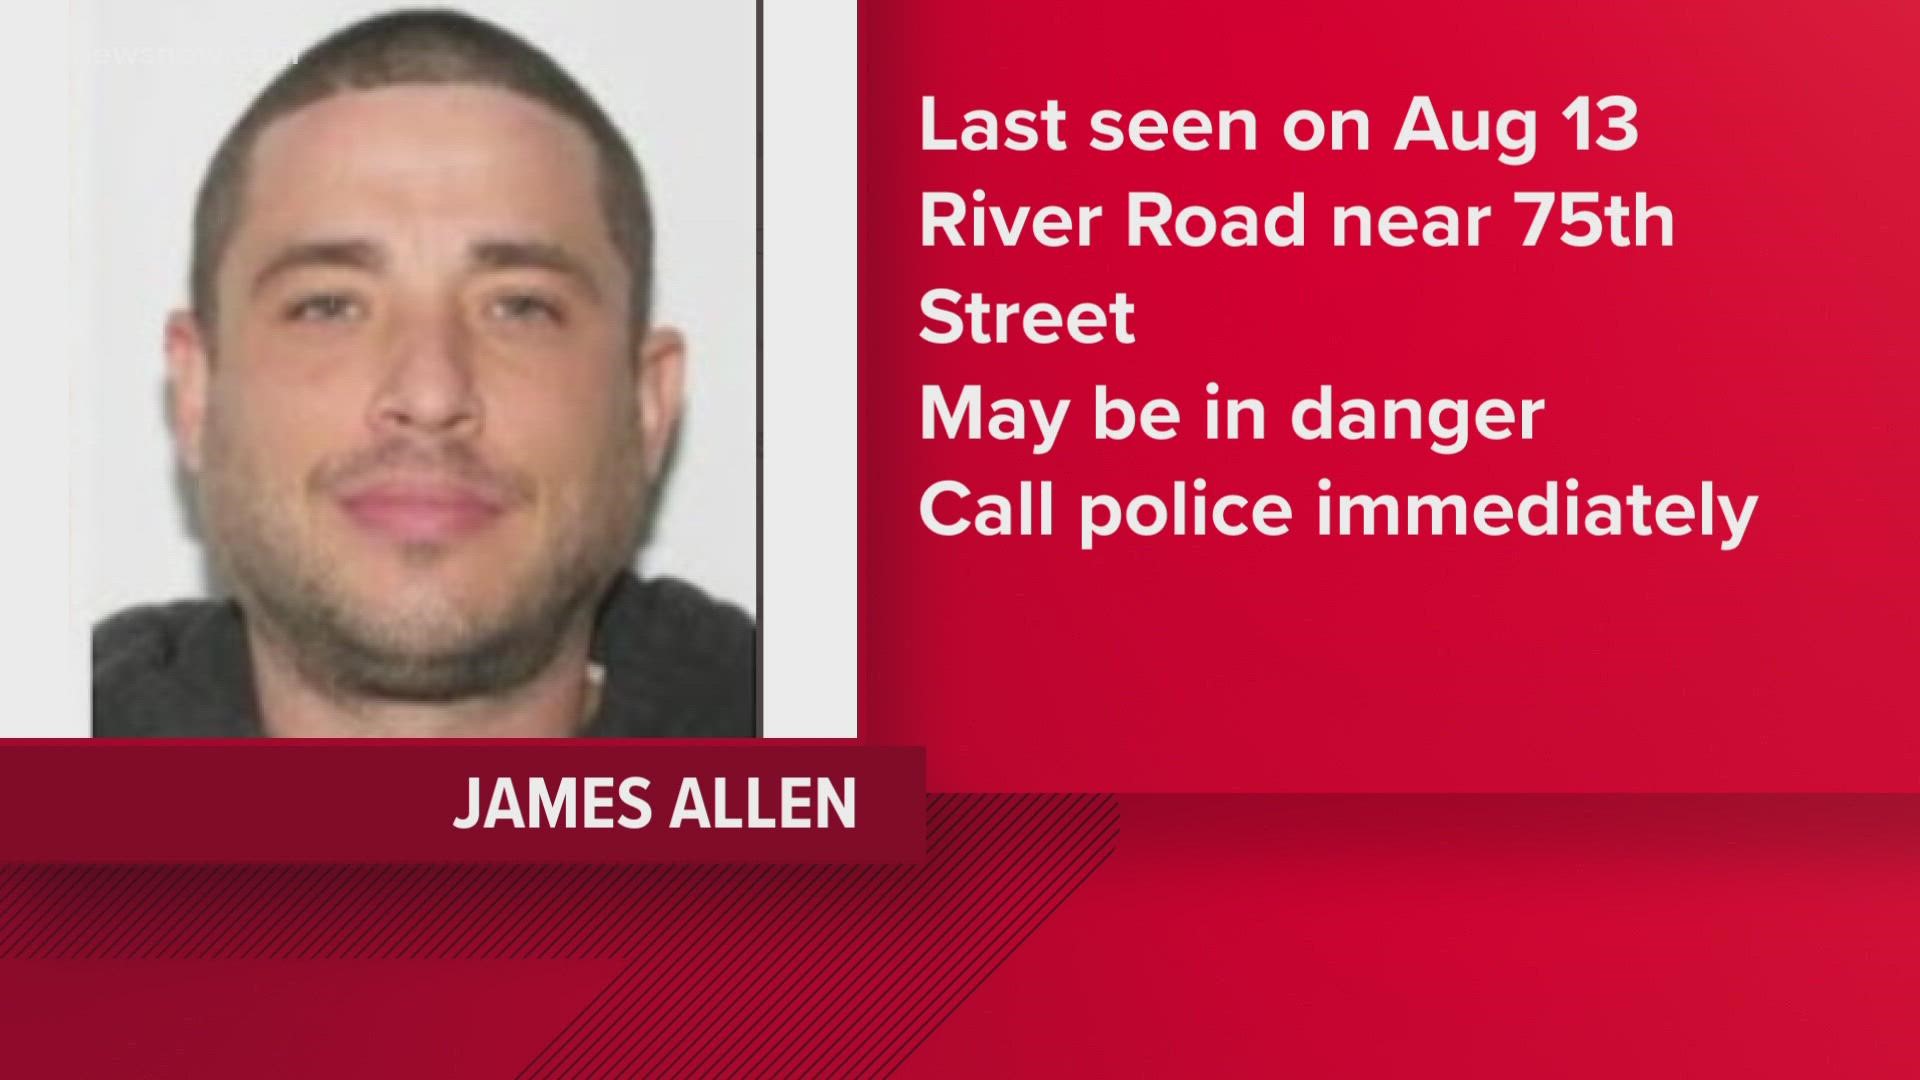 James Allen, 41, was last seen near the James River Bridge. If you've seen him, please call the Newport News Police Department at 757-247-2500.